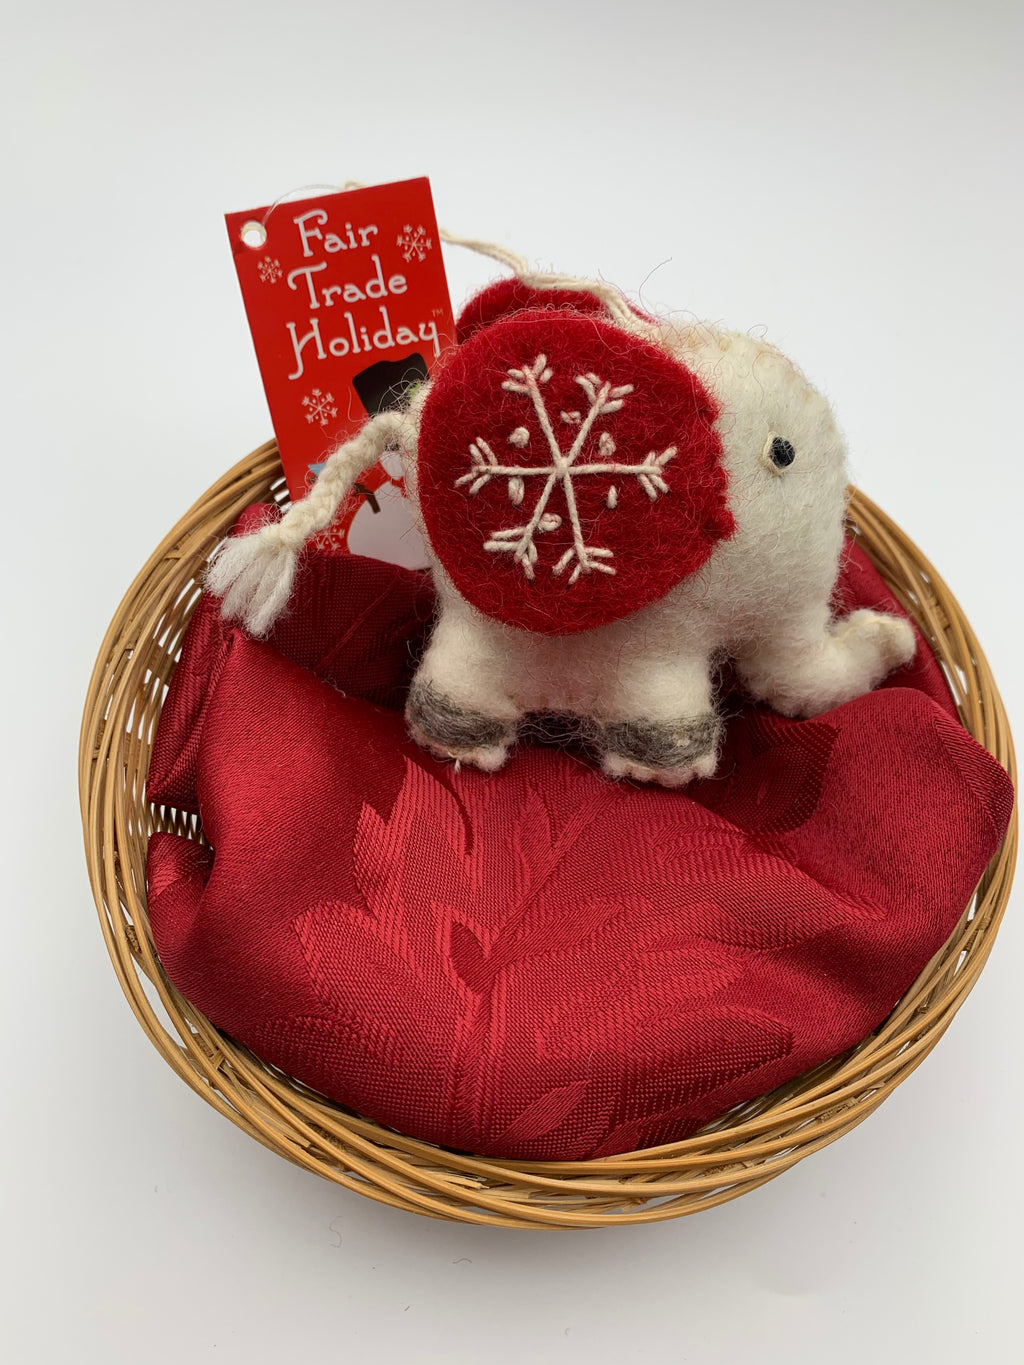 This is Jumbo the elephant, a Christmas ornament that is hand-crafted (fair trade) and is made of 100% natural wool.  He is off-white with large red ears and black accents (feet, eyes, etc.). The 'signature' (white) snowflake is on his ear.  He is approximately 3"x3.25" (his tail adds another 1.75"). He comes with a fair trade holiday "to/from" tag to use if giving this as a gift.